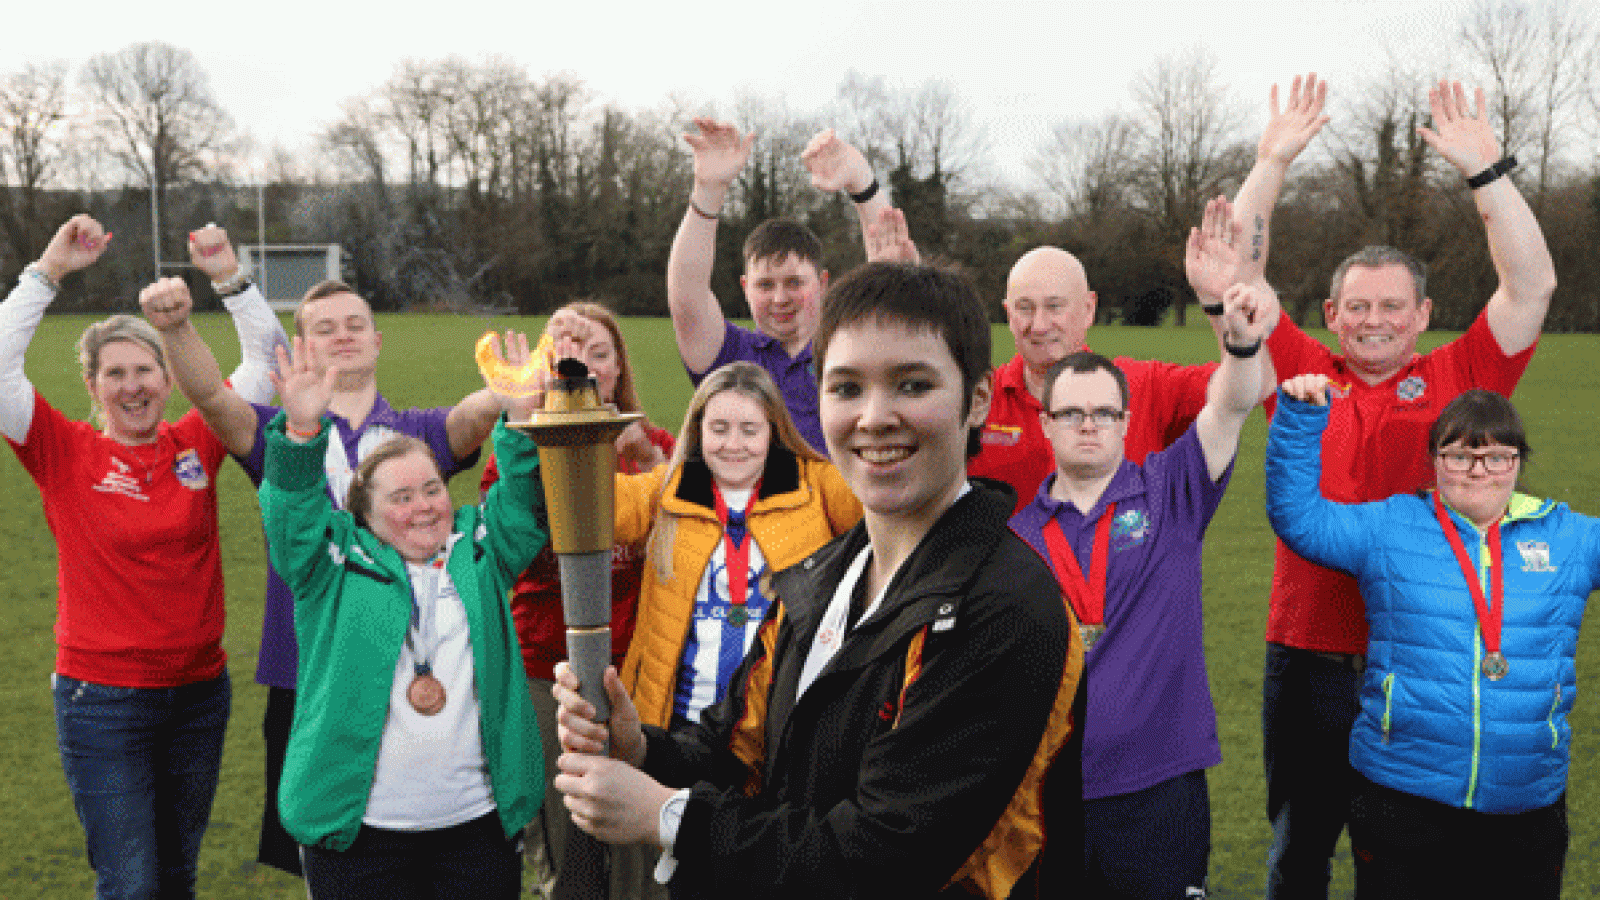 The Flame of Hope with Special Olympics athletes and members of the LETR at the Ireland Winter Games launch recently